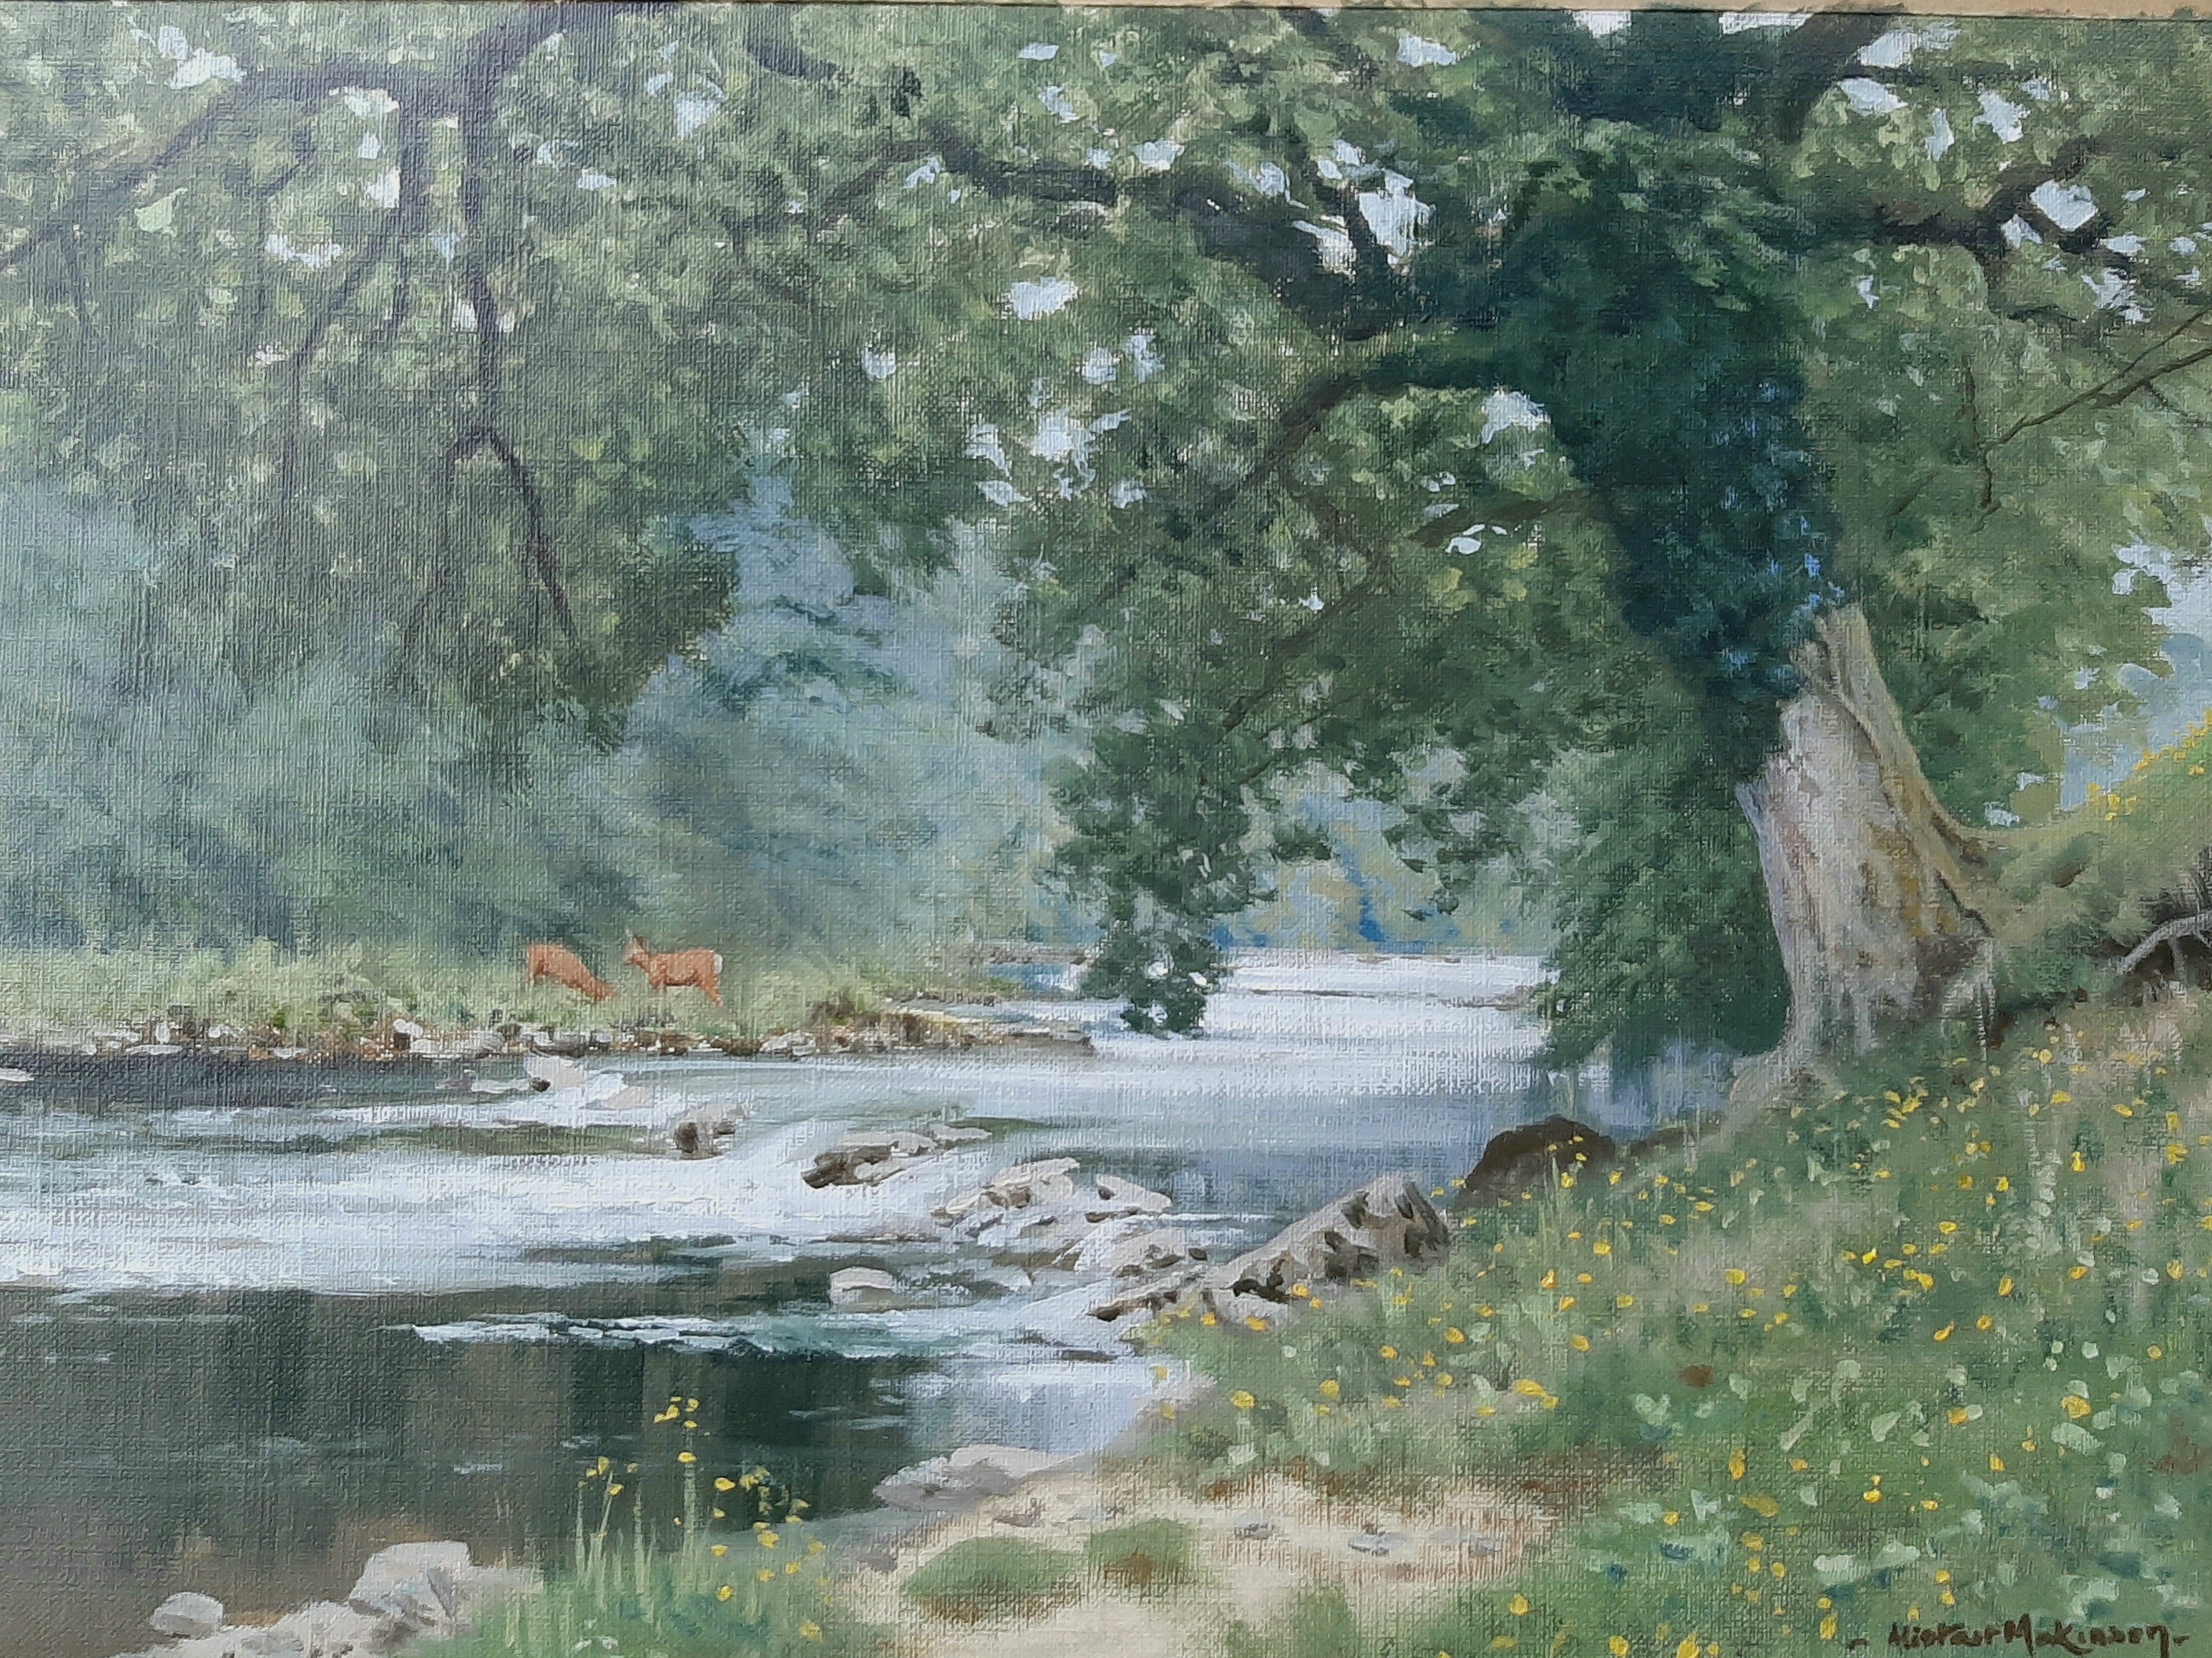 'Summer River' - Original Oil Painting by Alistair Makinson - 26 x 36cm